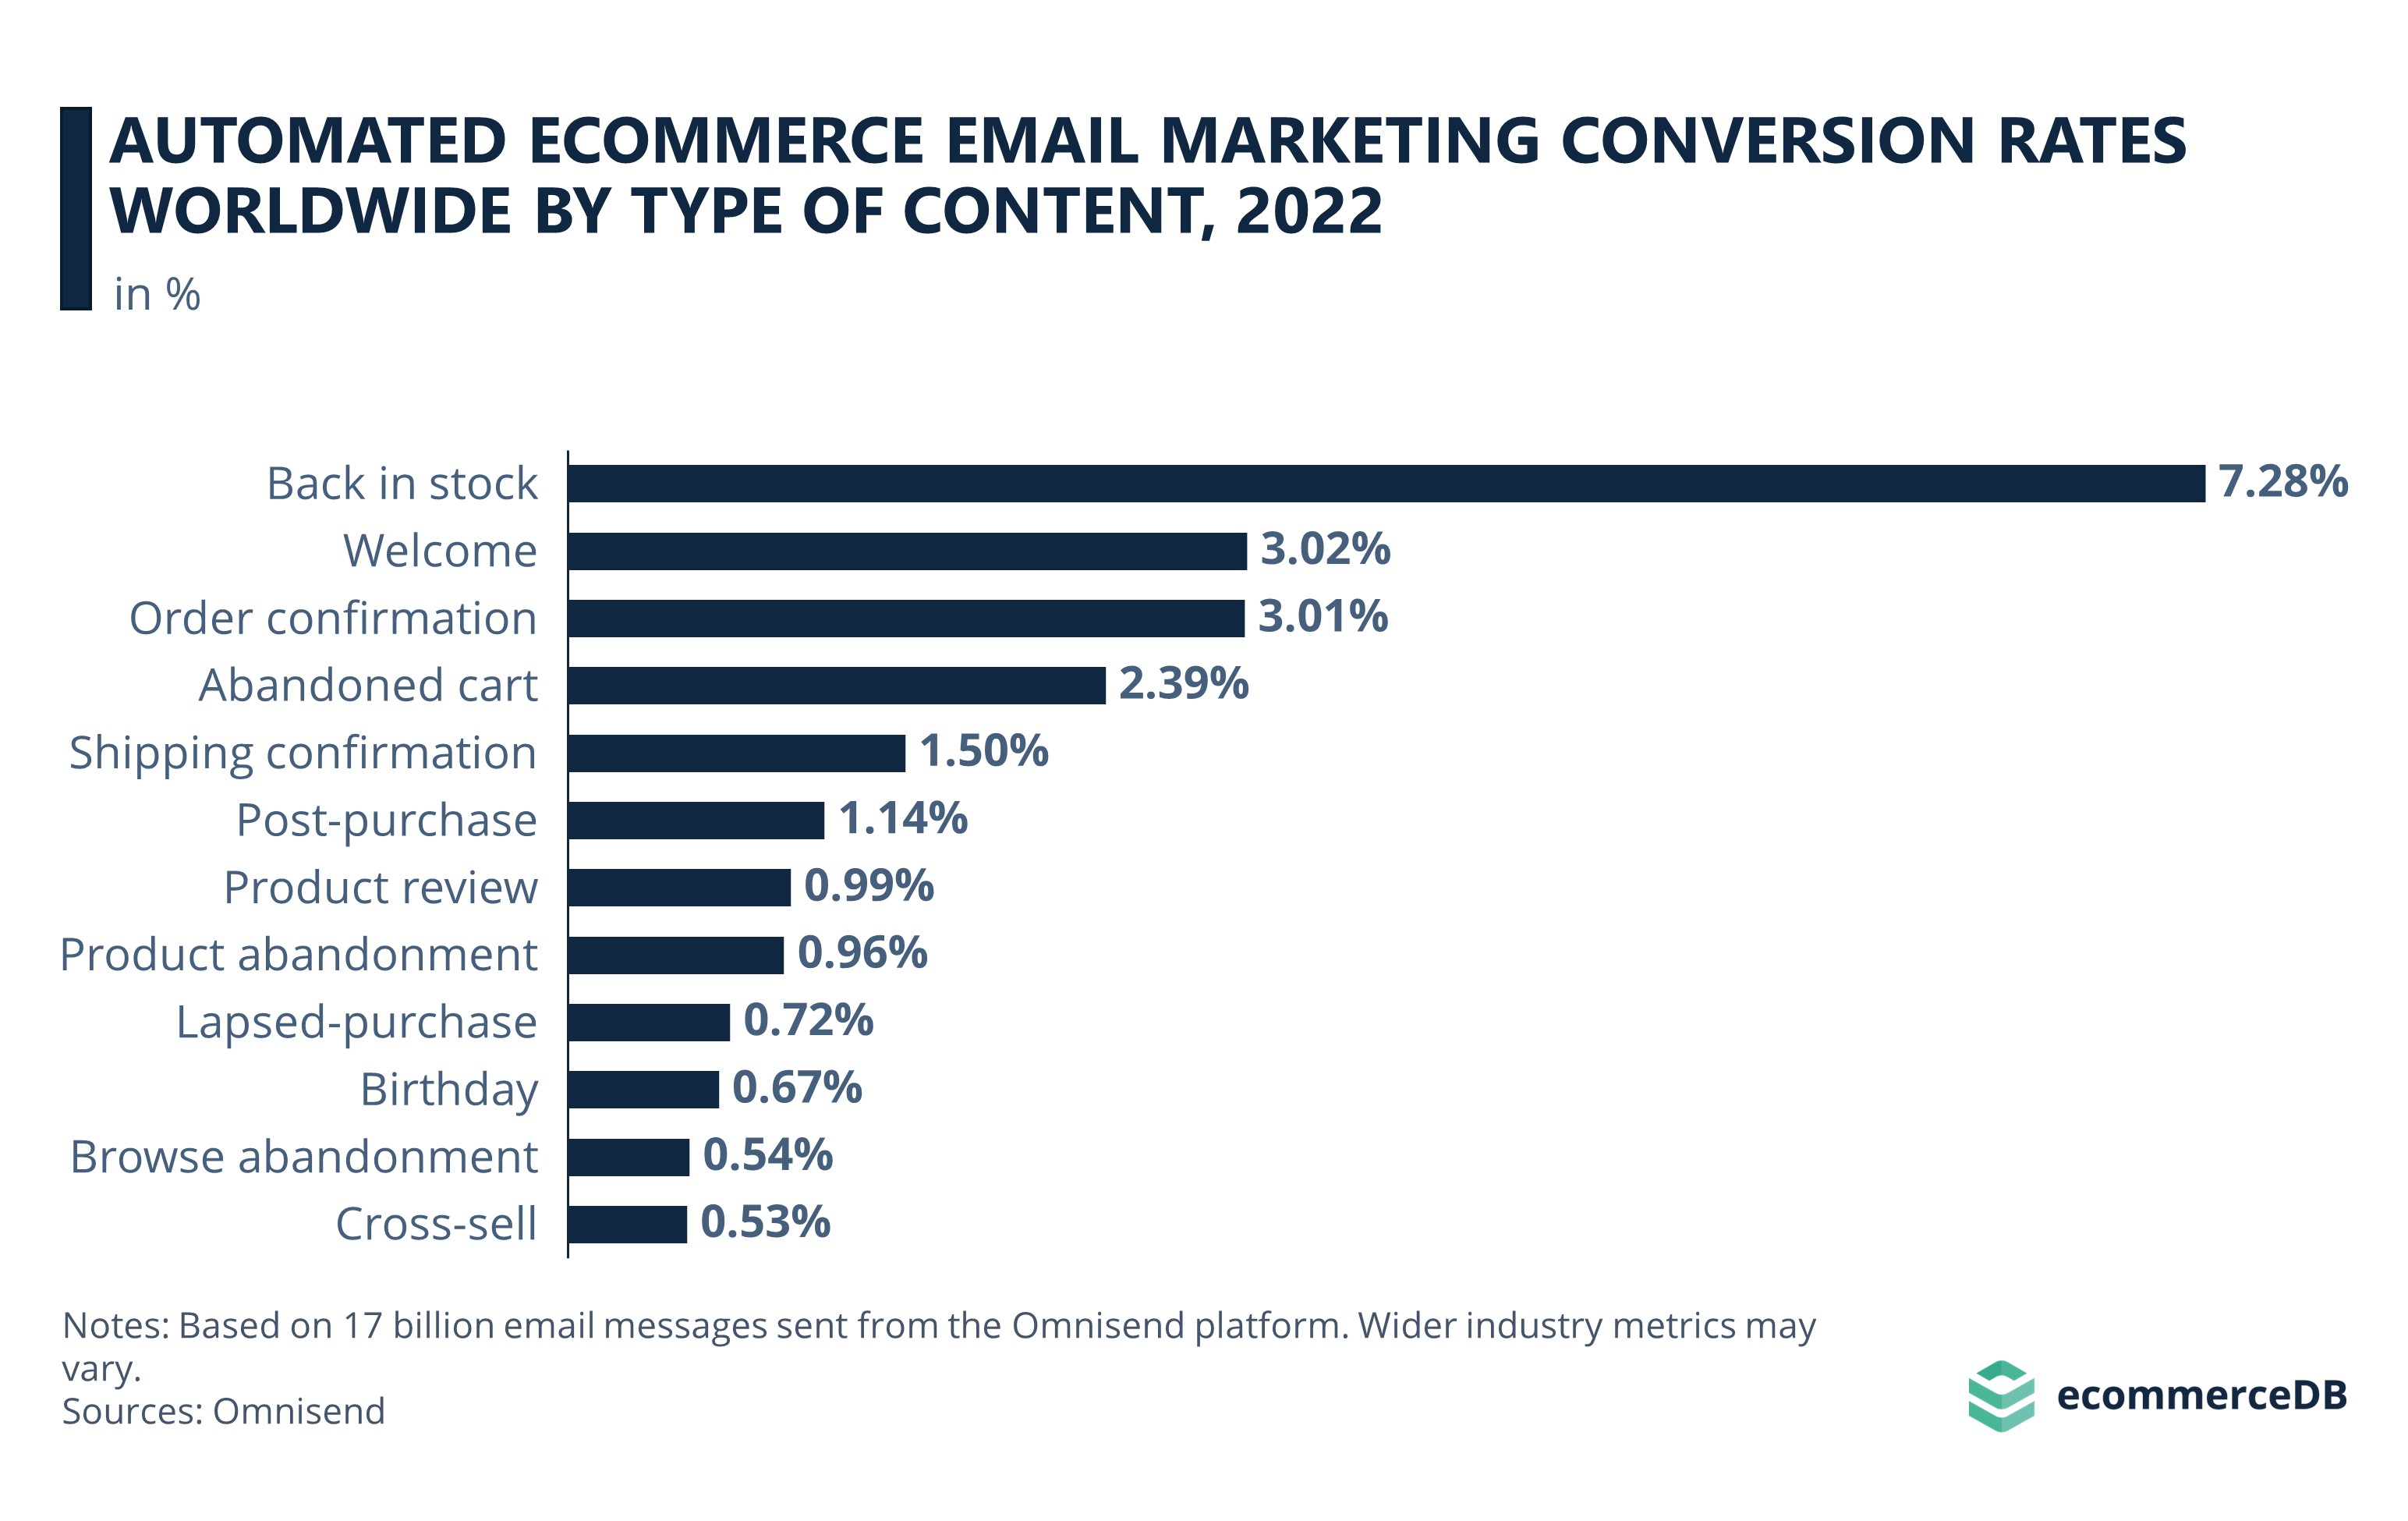 Automated eCommerce email marketing conversion rates worldwide by type of content, 2022